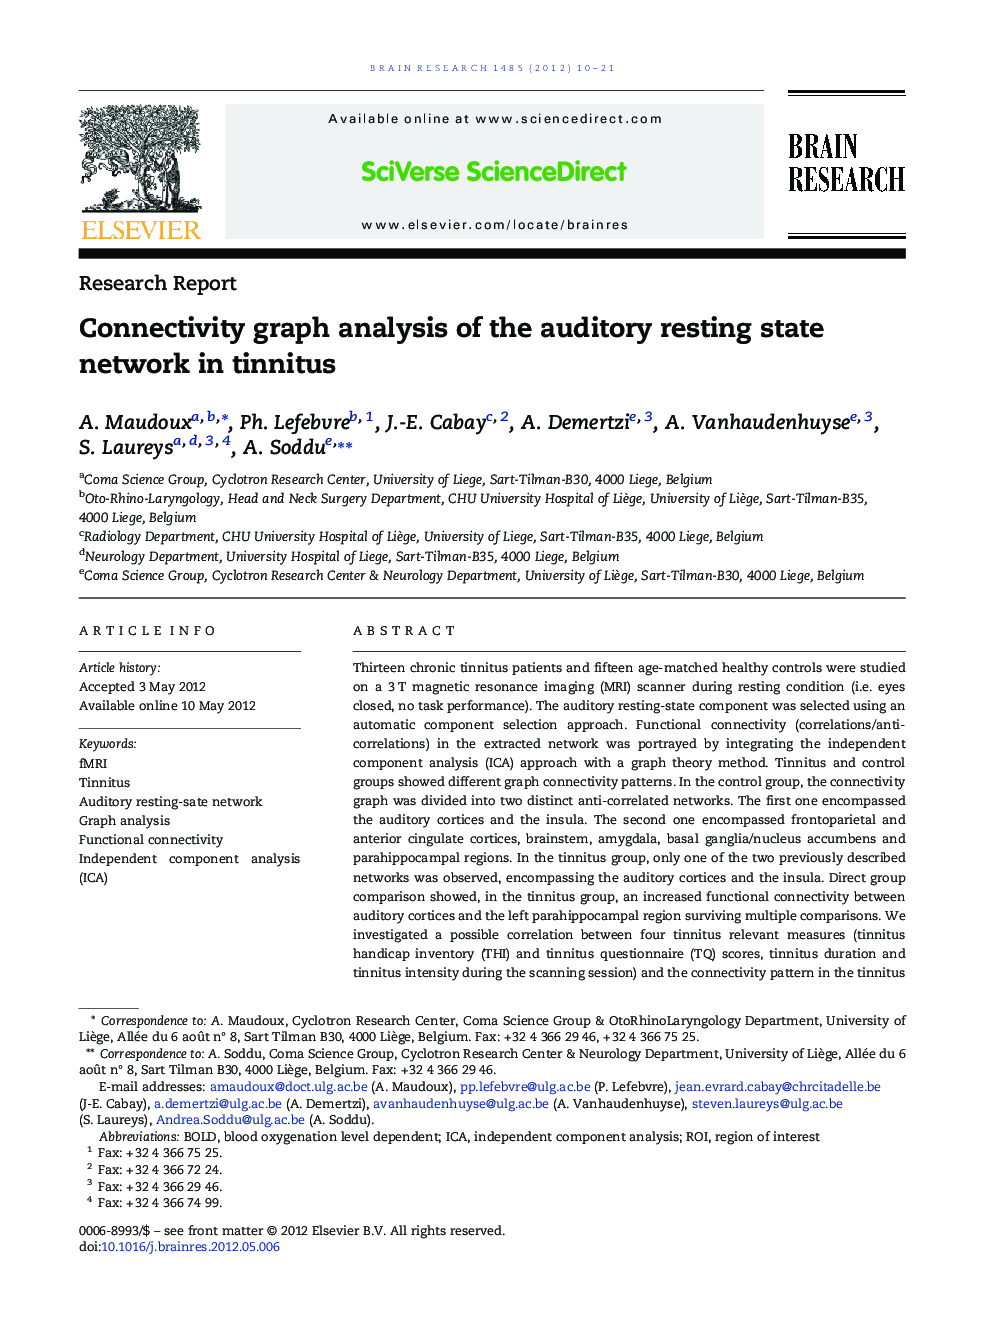 Connectivity graph analysis of the auditory resting state network in tinnitus